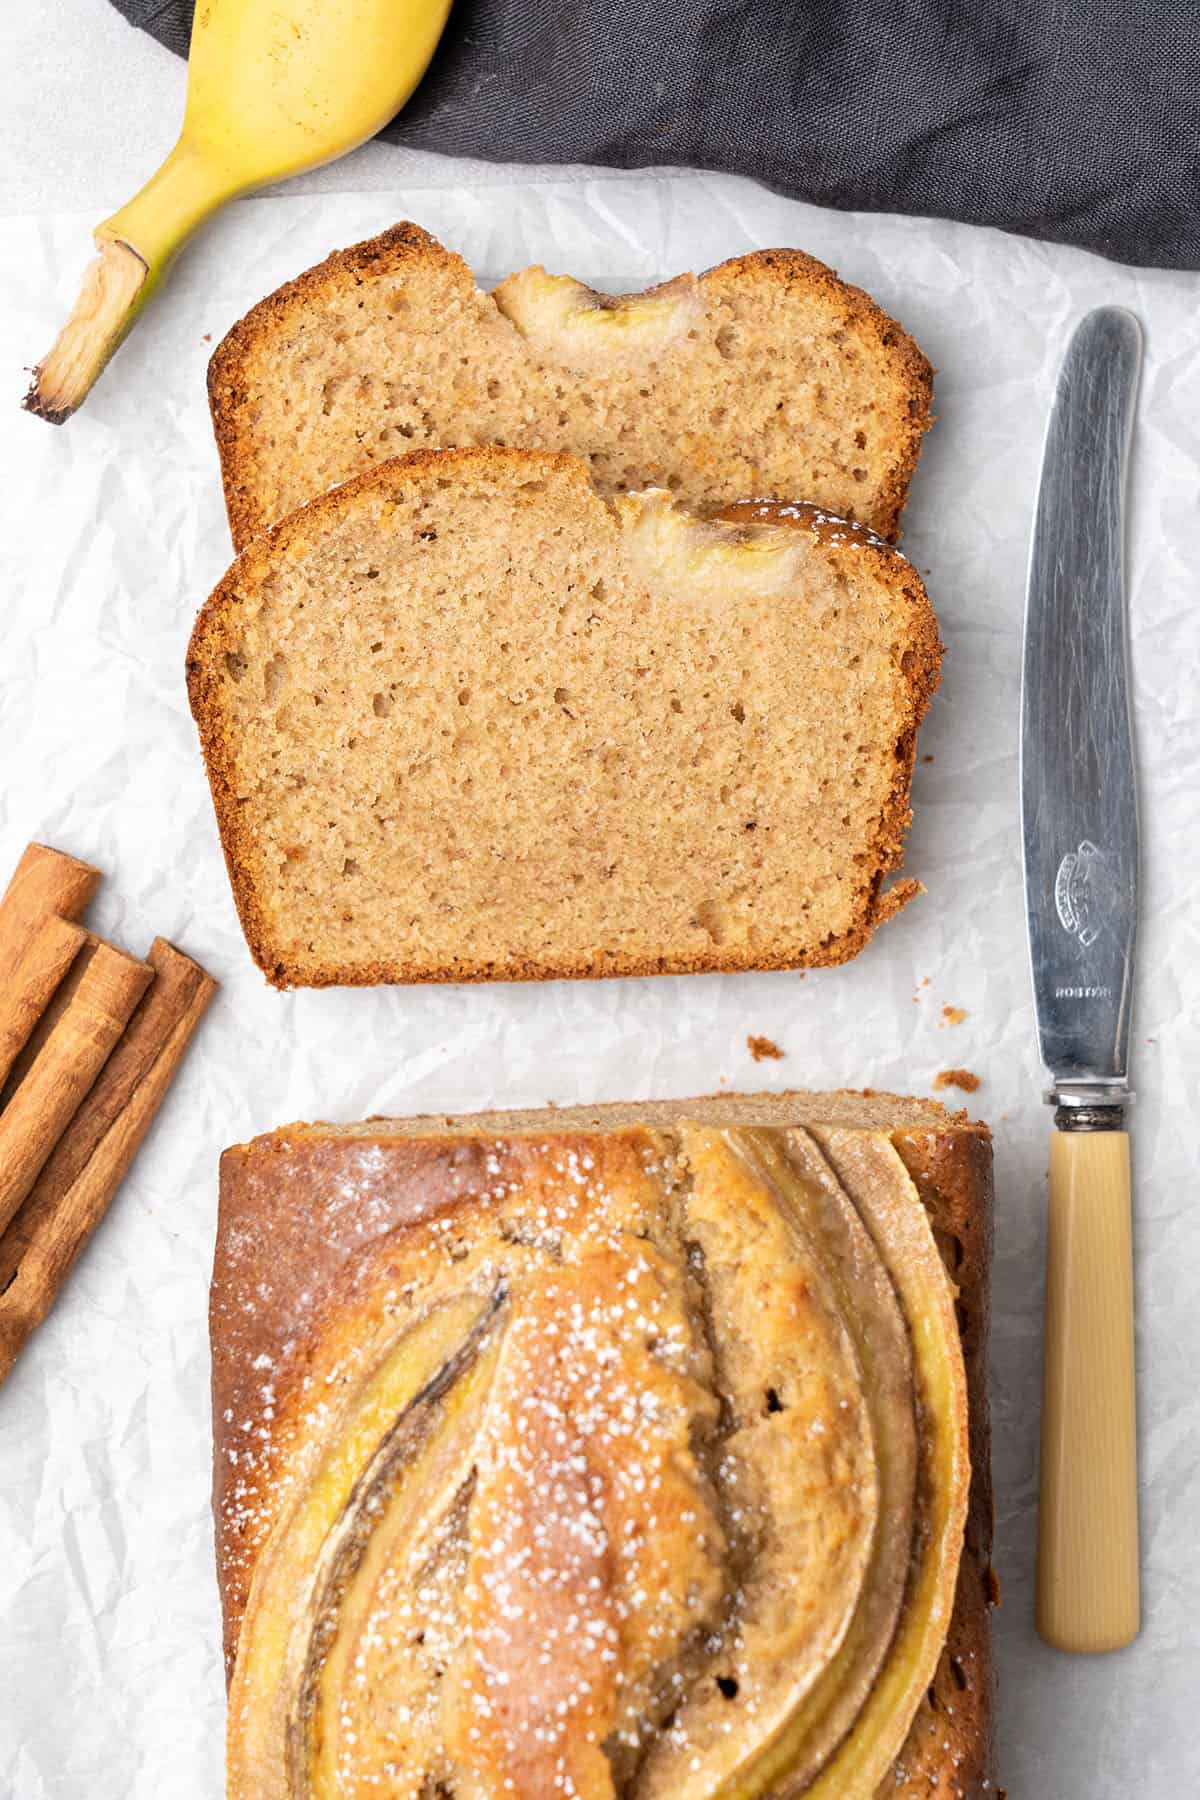 slices of Banana bread on a cooling rack.